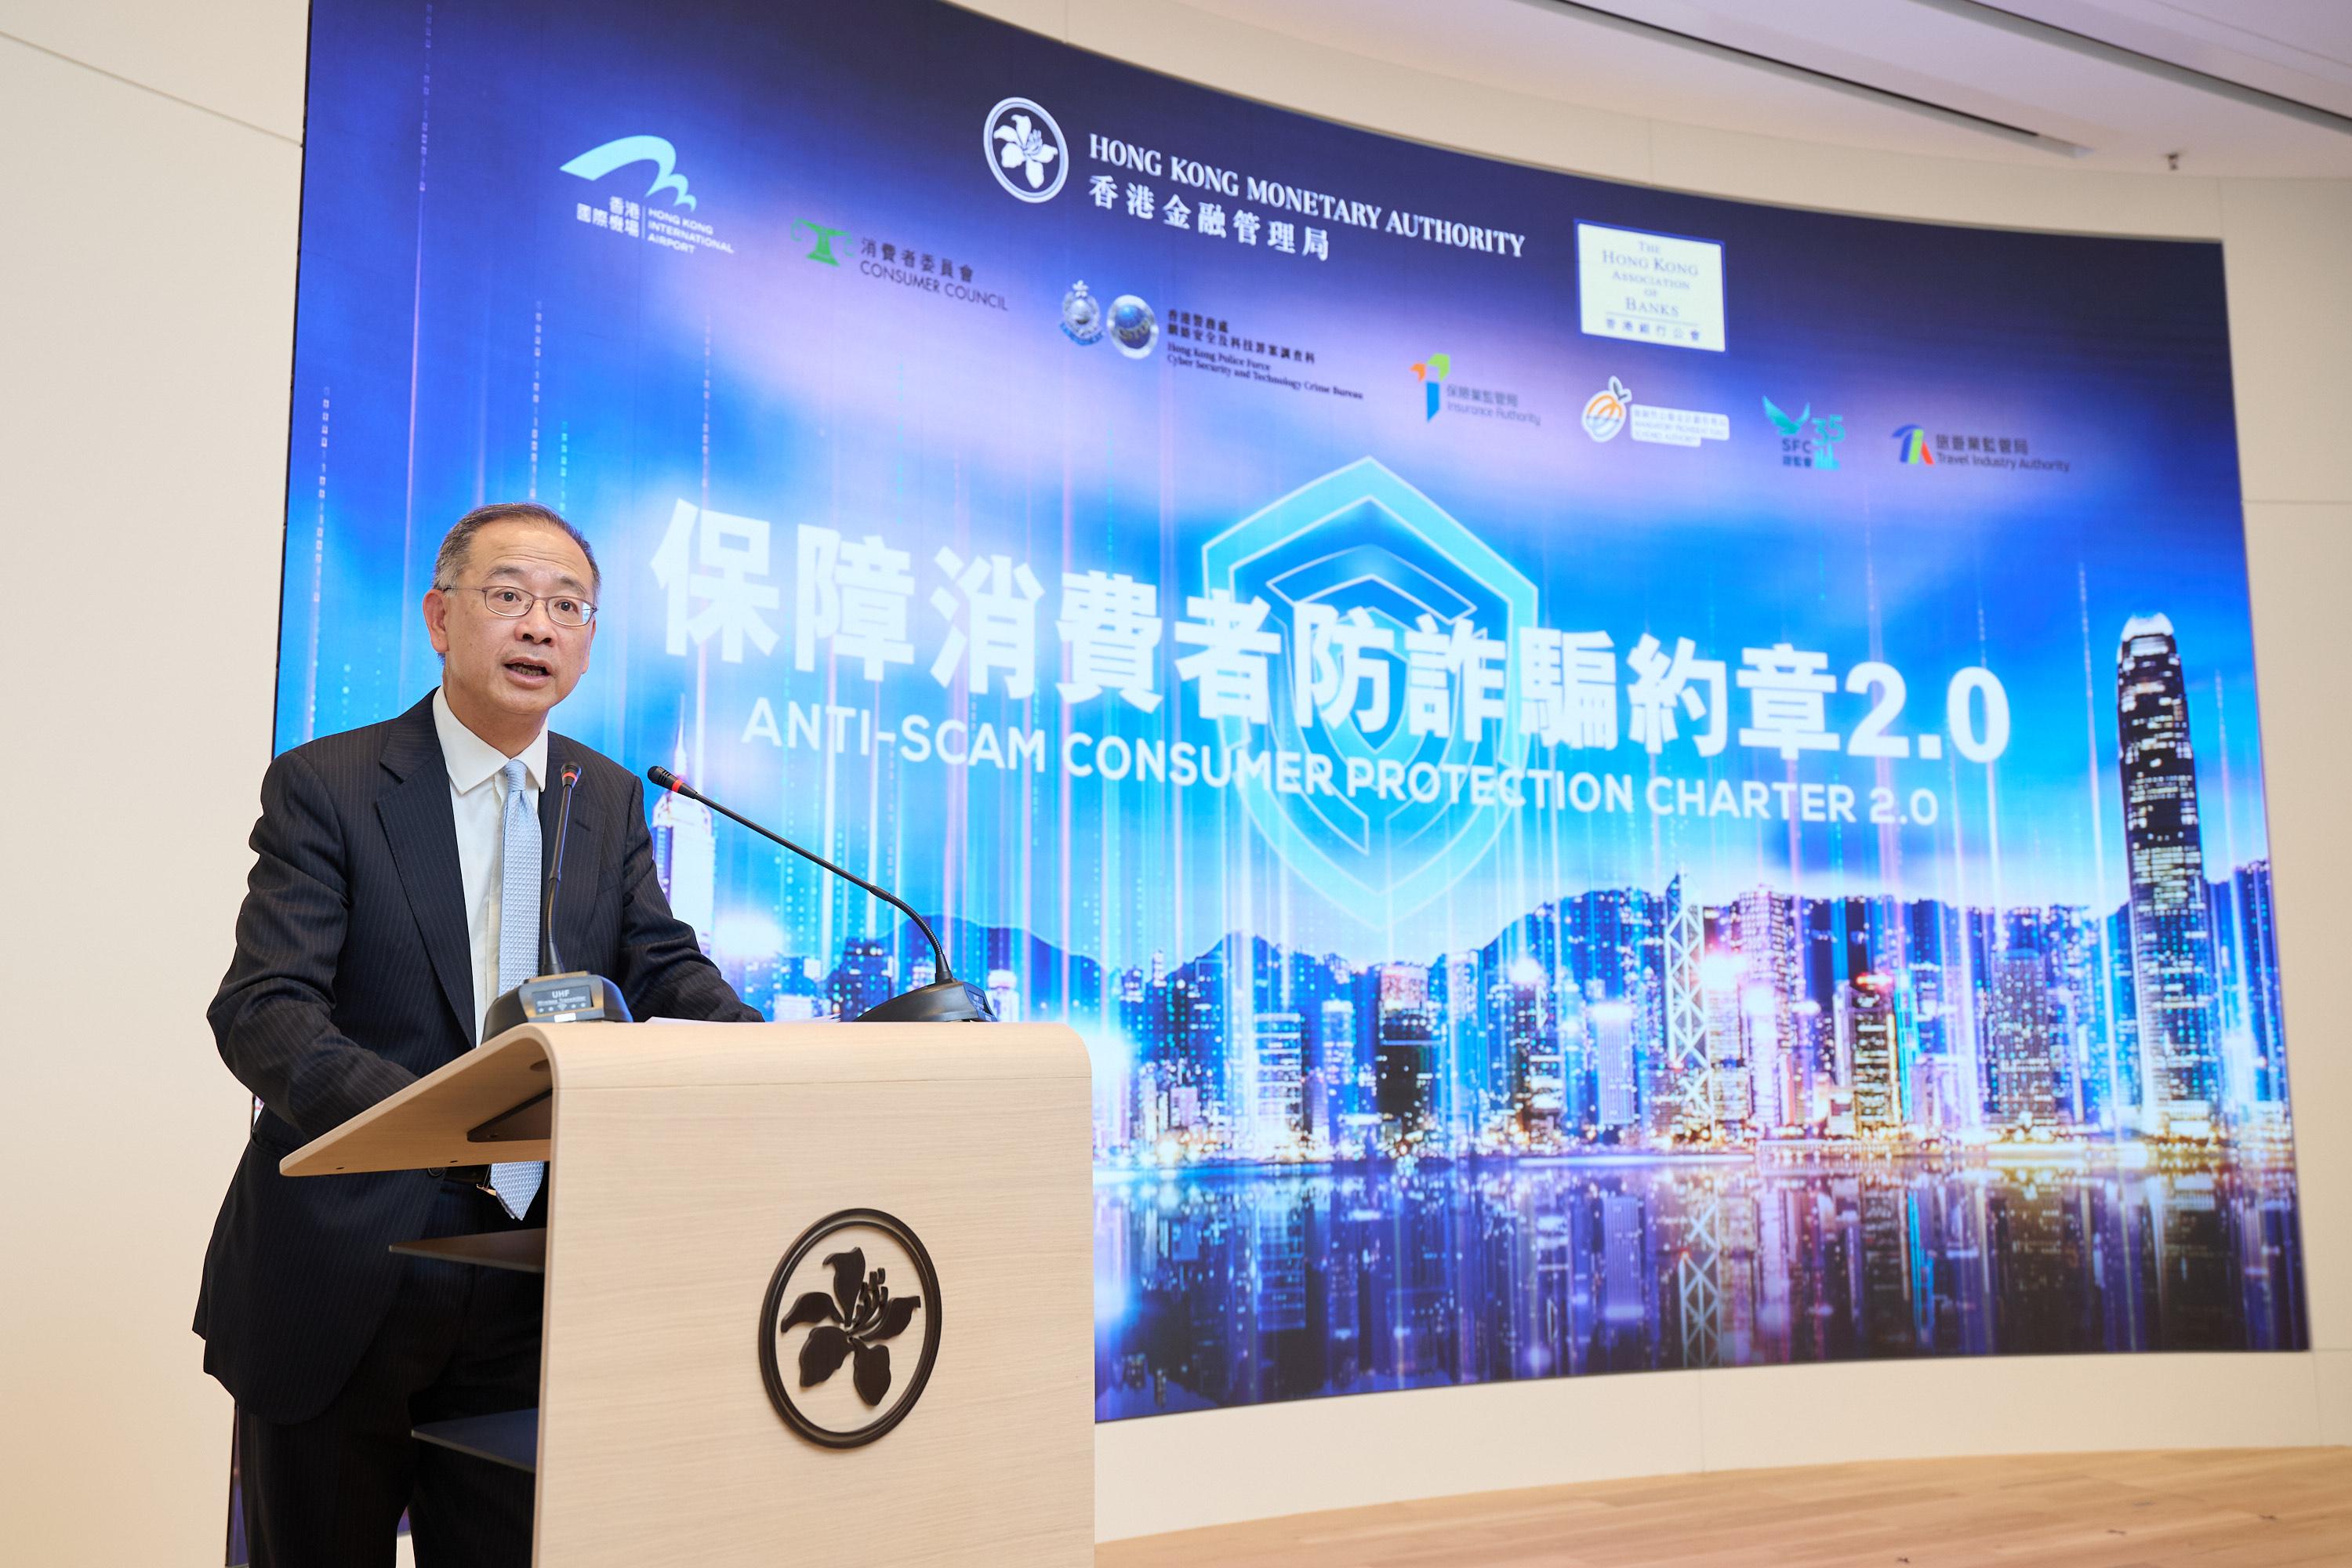 The Chief Executive of the Hong Kong Monetary Authority, Mr Eddie Yue, gave opening remarks at the Anti-Scam Consumer Protection Charter 2.0 event, announcing that the coverage of the Charter is expanded to include more institutions and merchants.